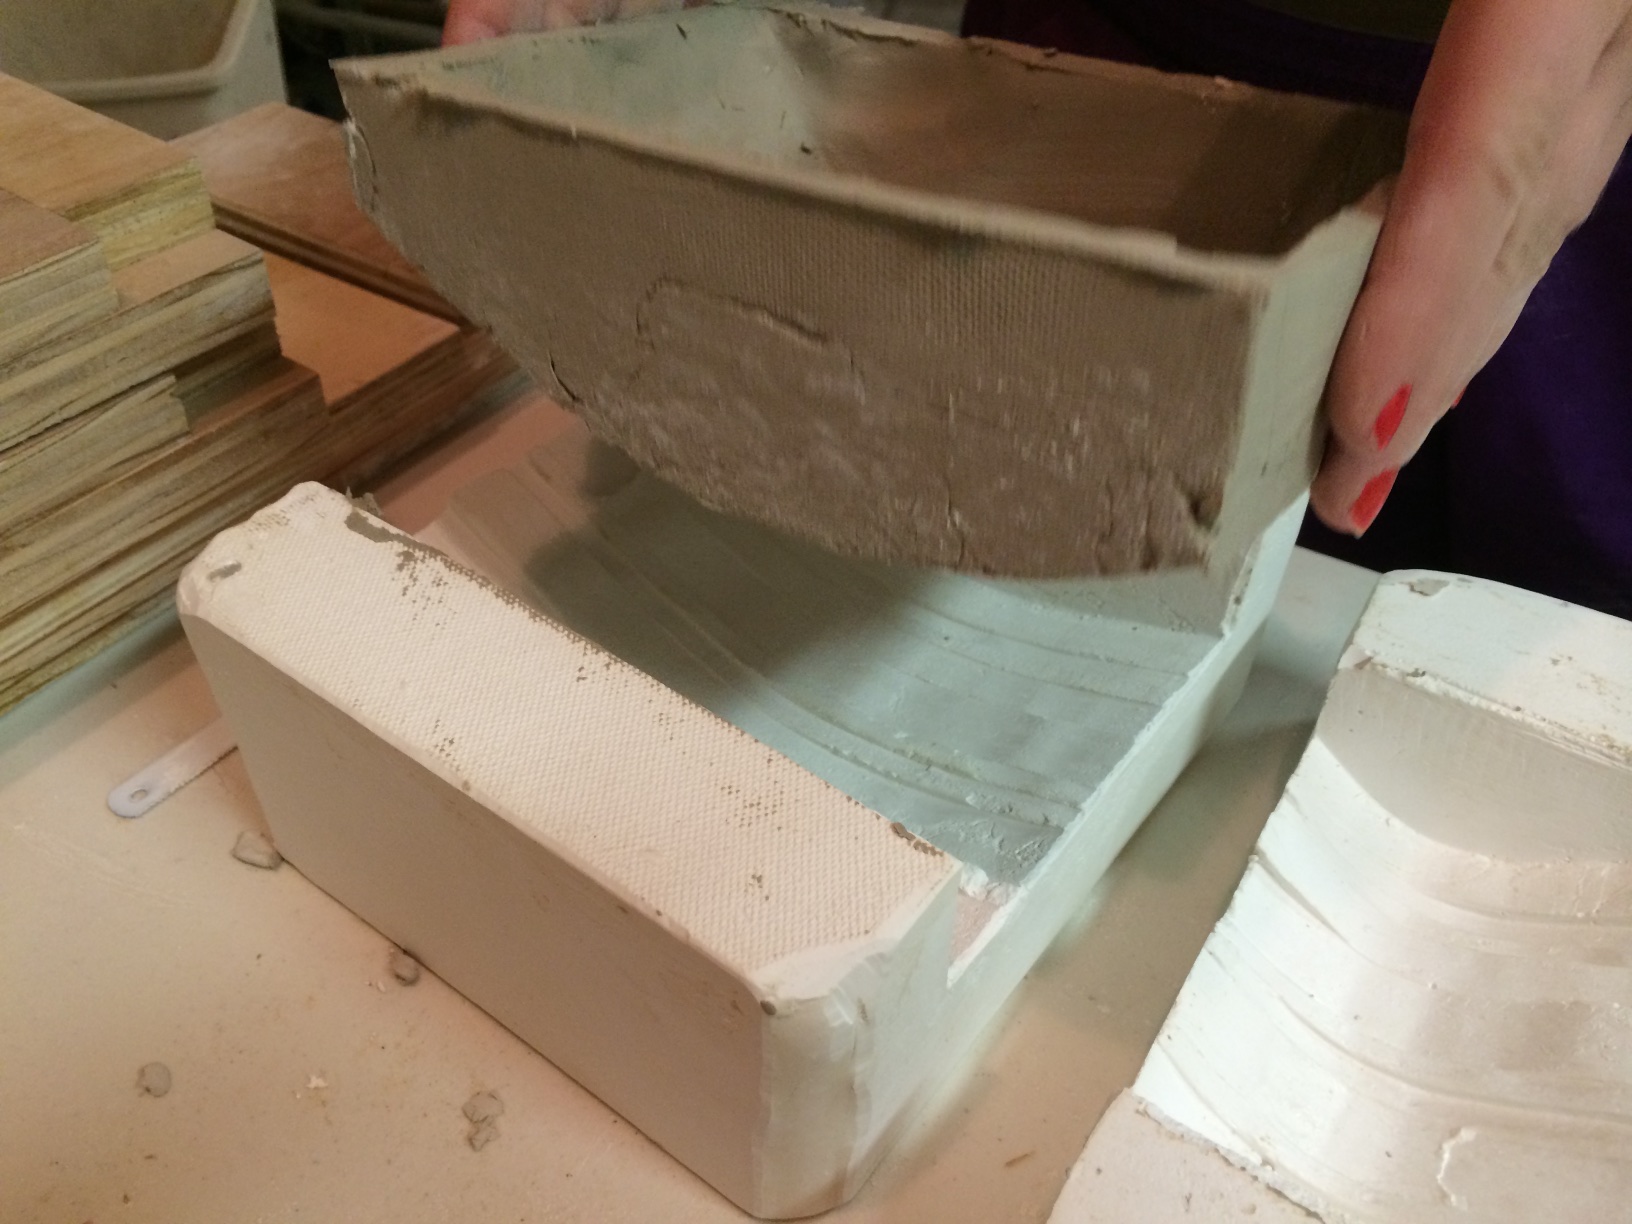  Removing a tile from the plaster mold. 